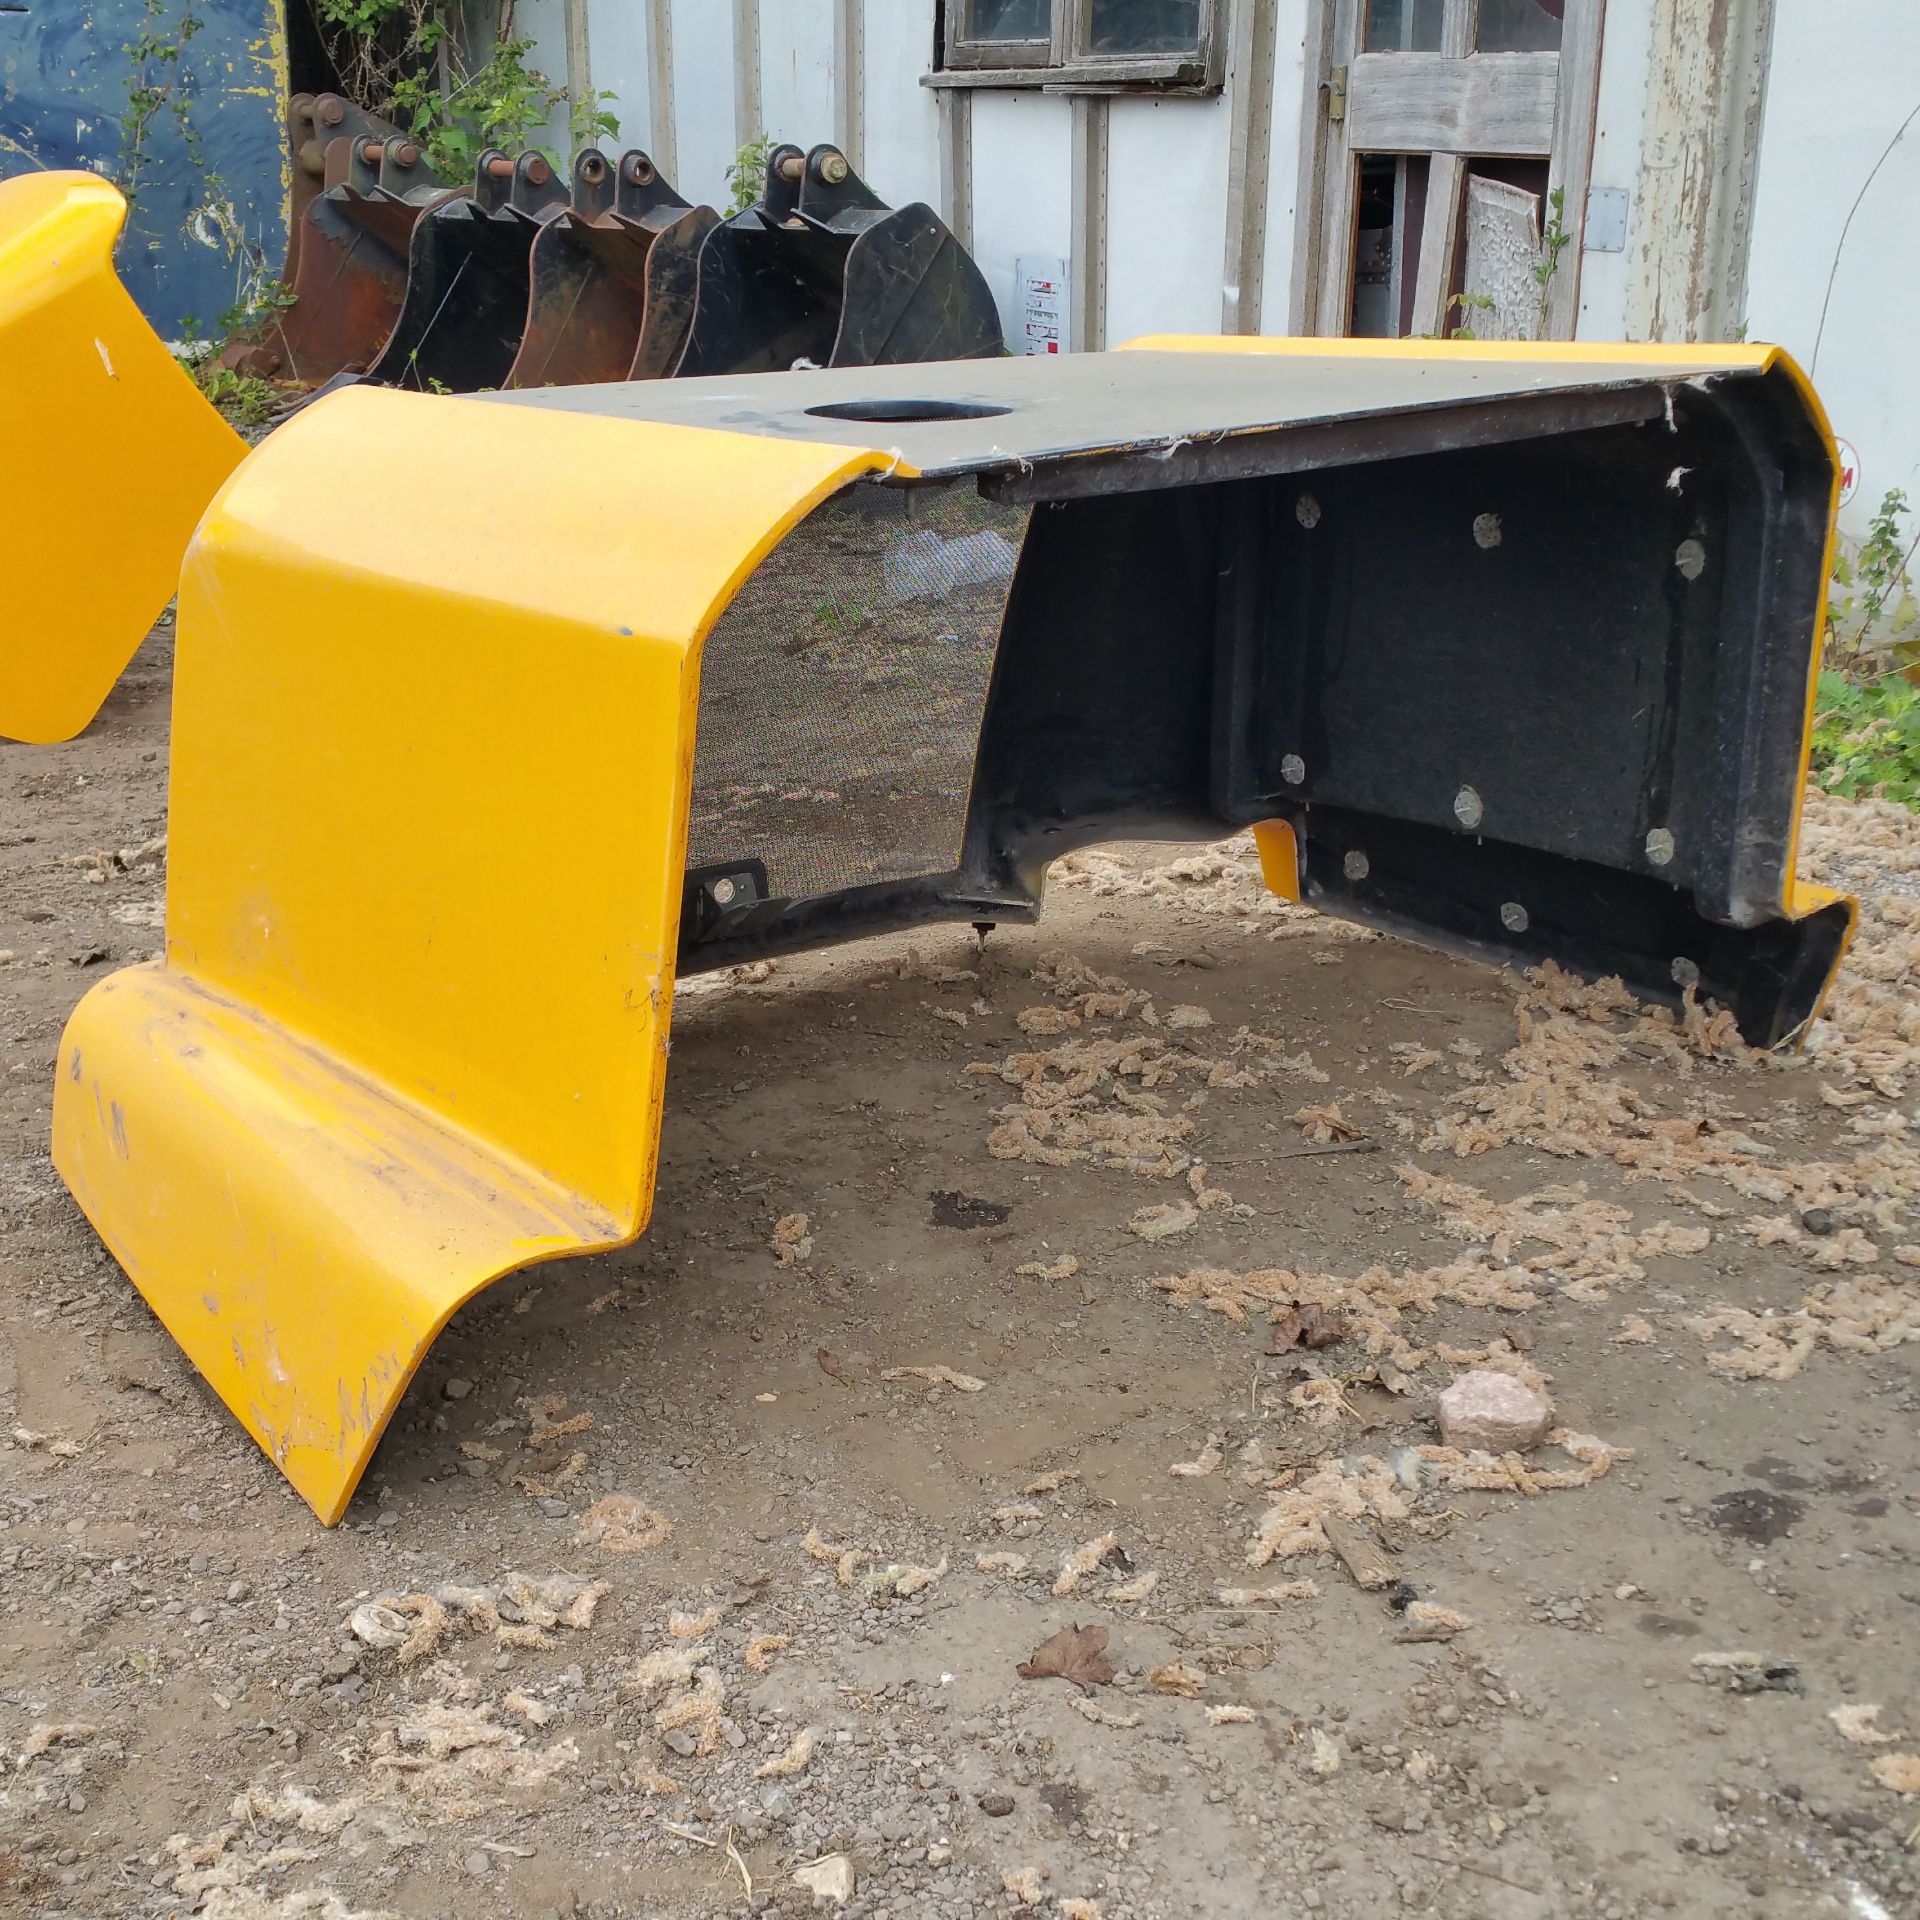 Jcb TM310 bonnet   New and unused   Delivery arranged - Image 5 of 5